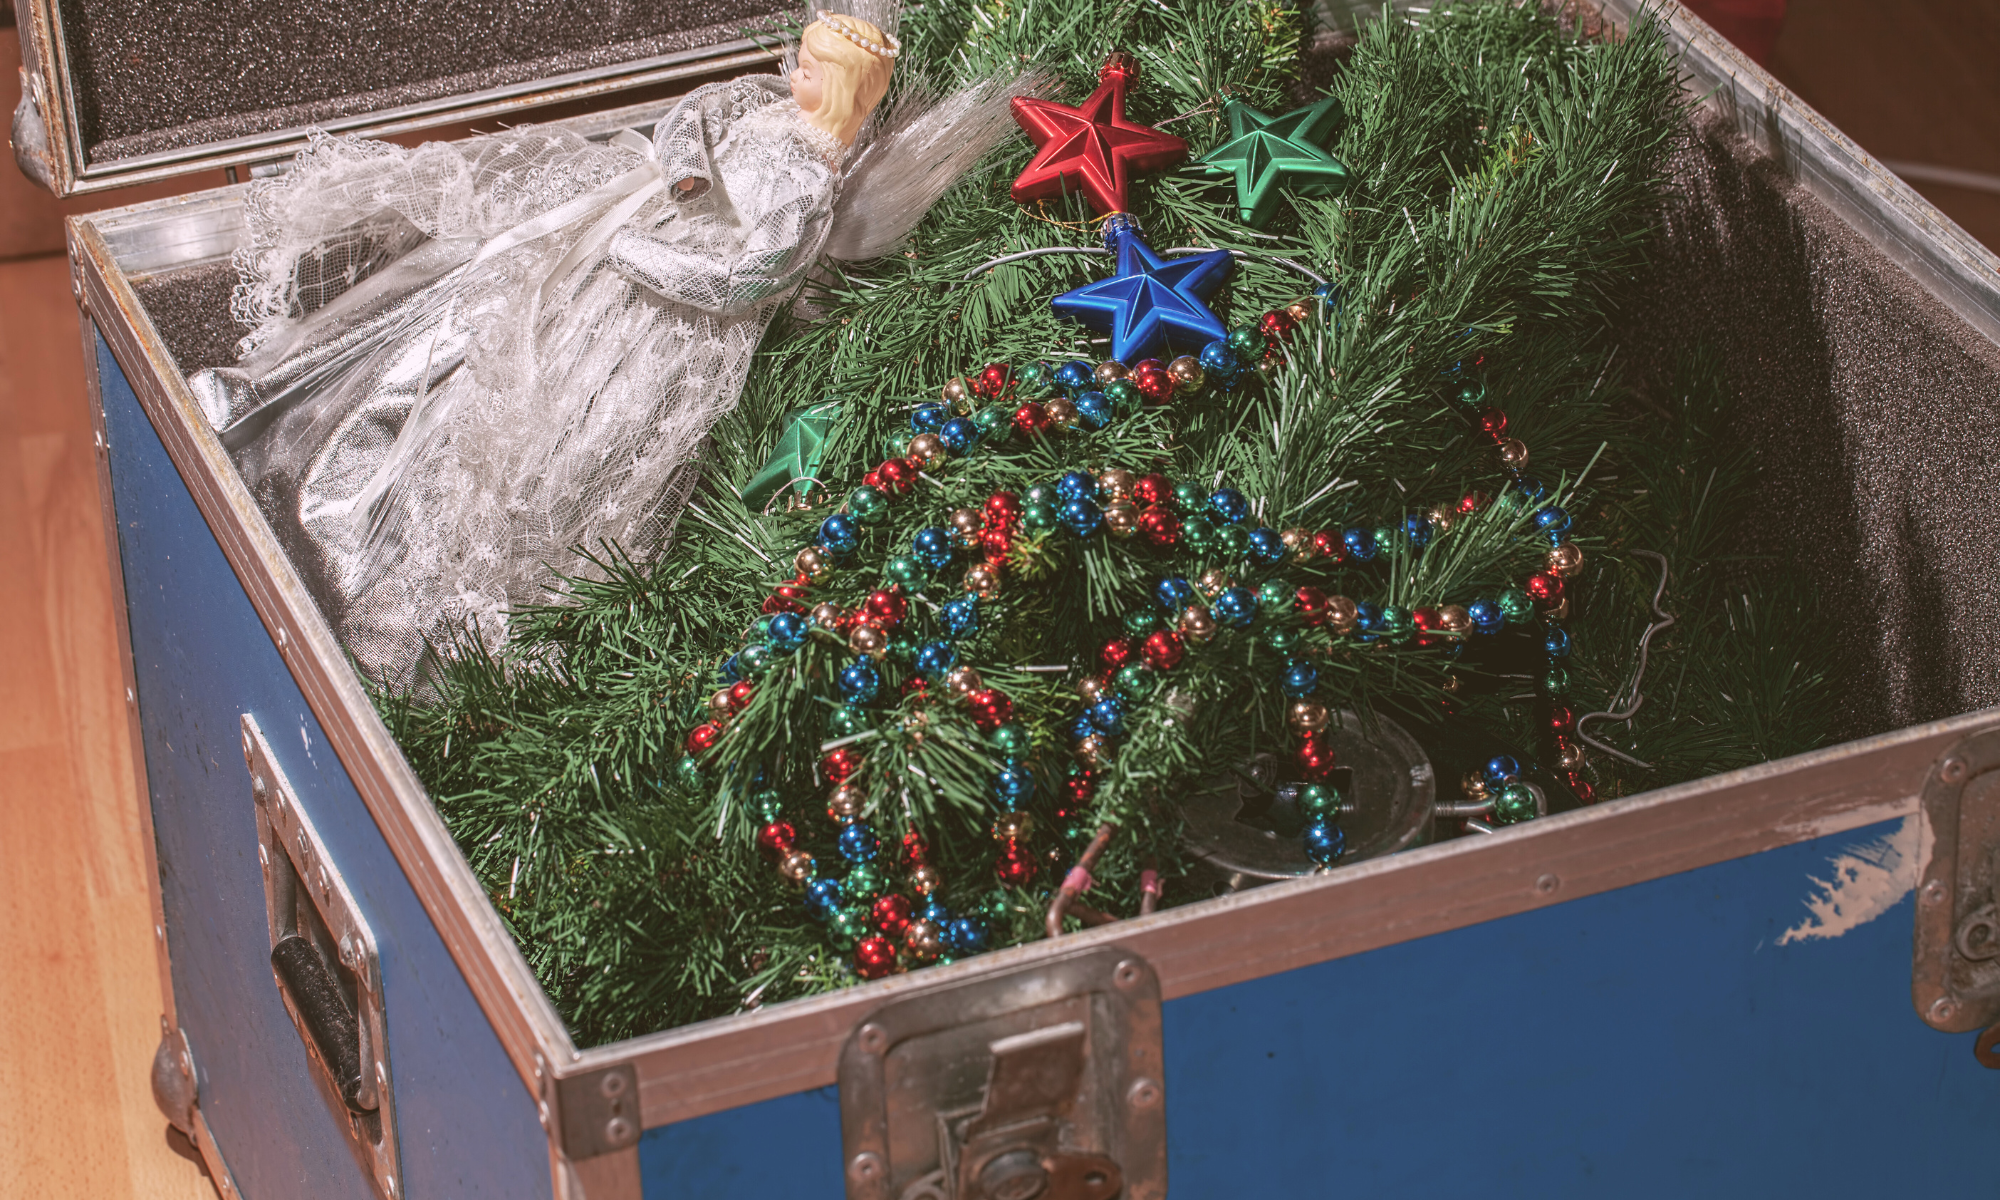 How to Set Up a Small Christmas Village Display in 5 Simple Steps